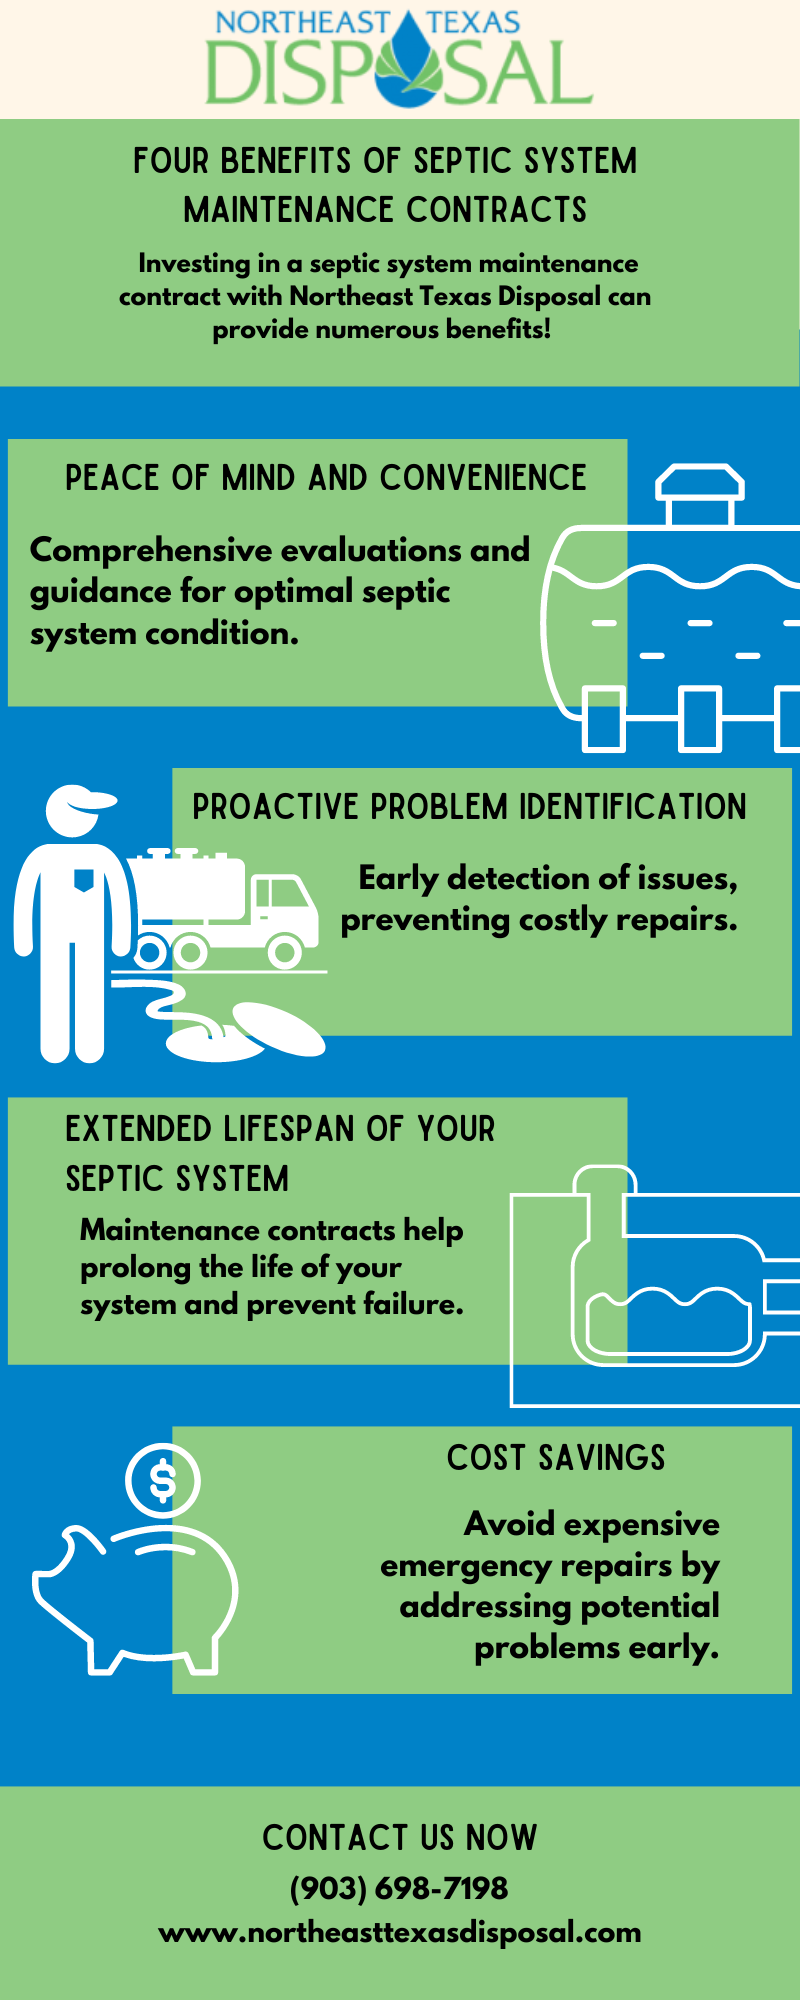 M38733 - Infographic - Four Benefits Of Septic System Maintenance Contracts (1).png